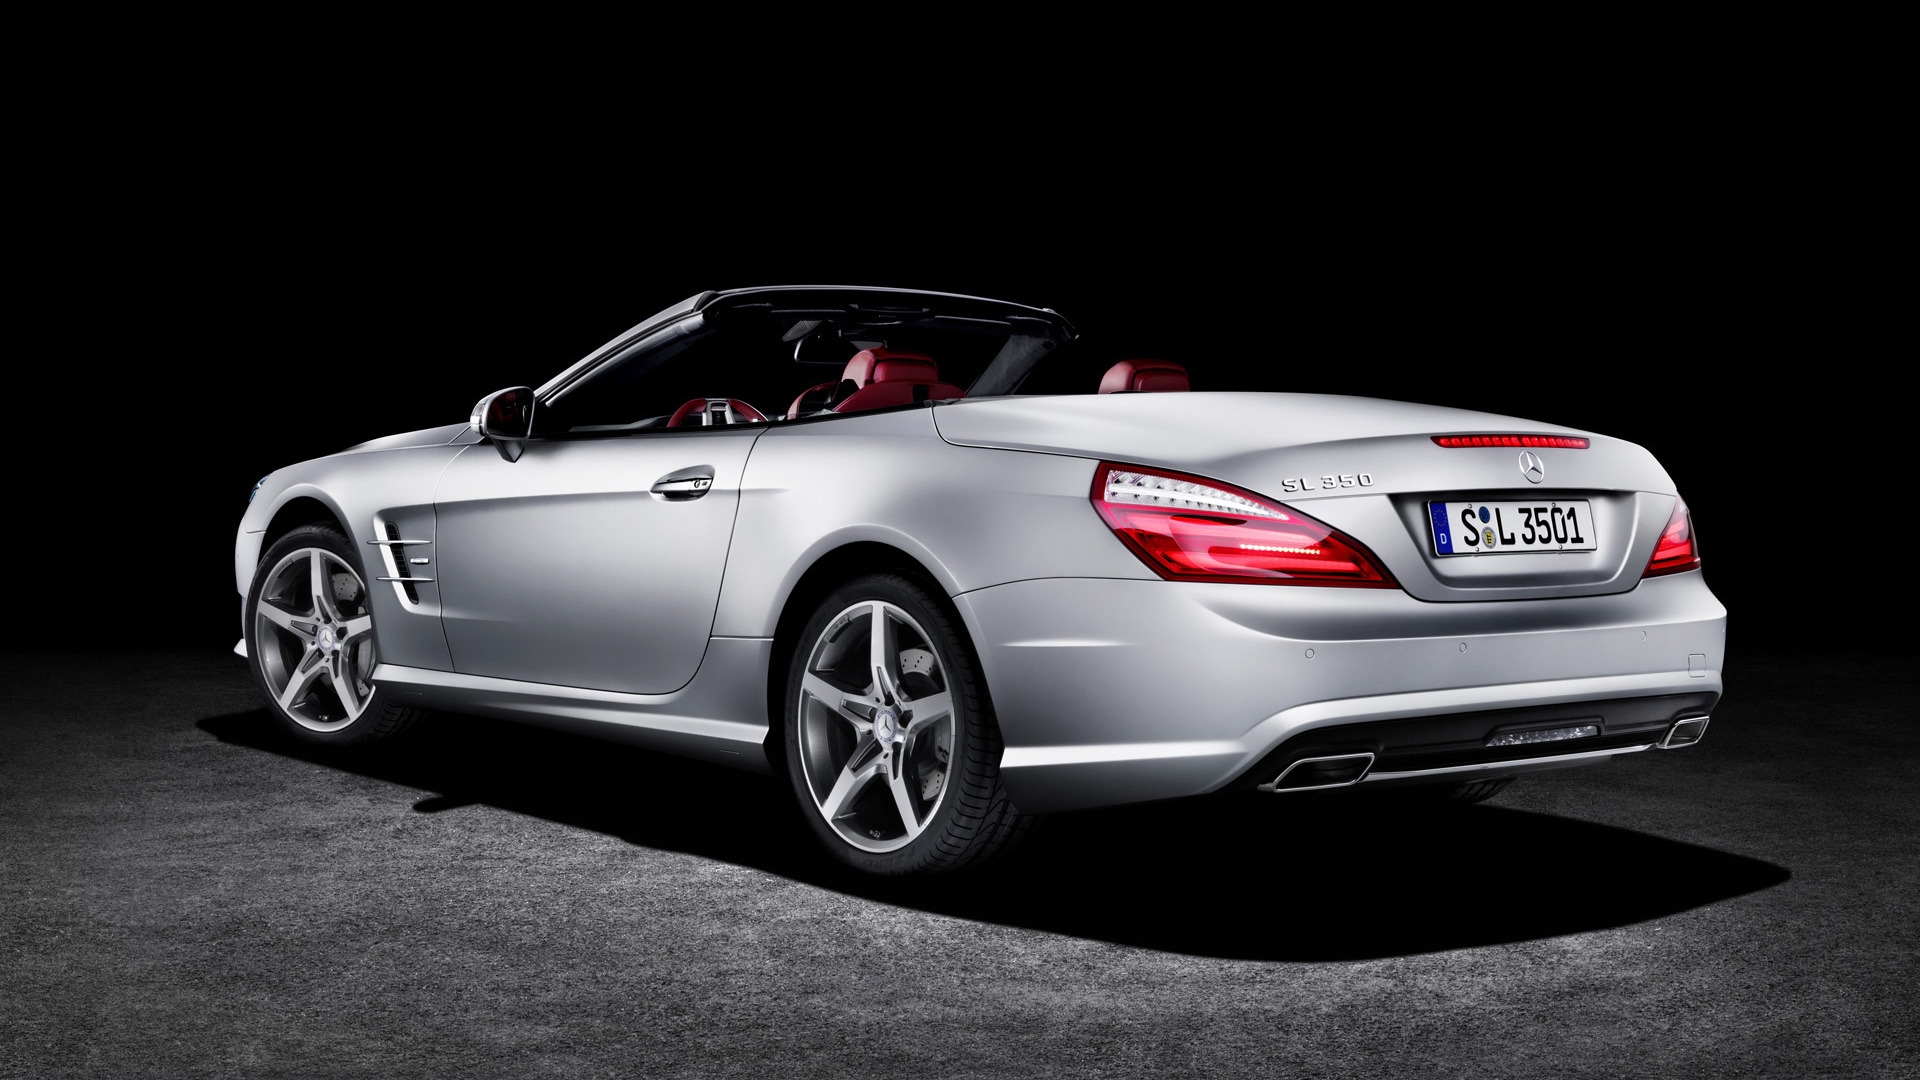 2012 Mercedes Benz SL-350 Edition Rear for 1920 x 1080 HDTV 1080p resolution